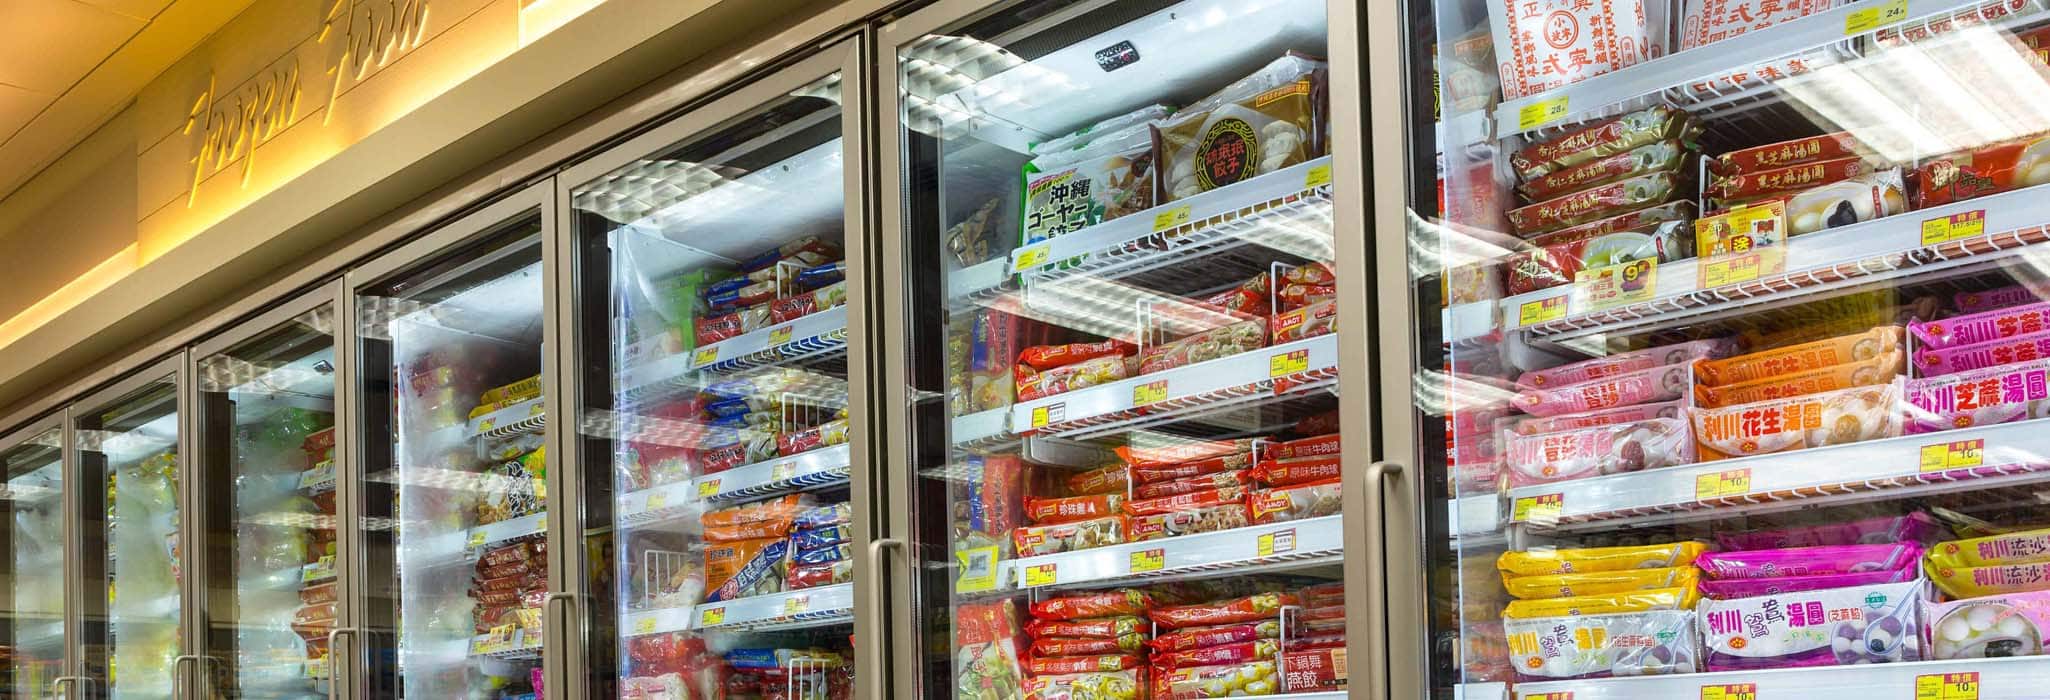 Commercial Refrigeration Service.